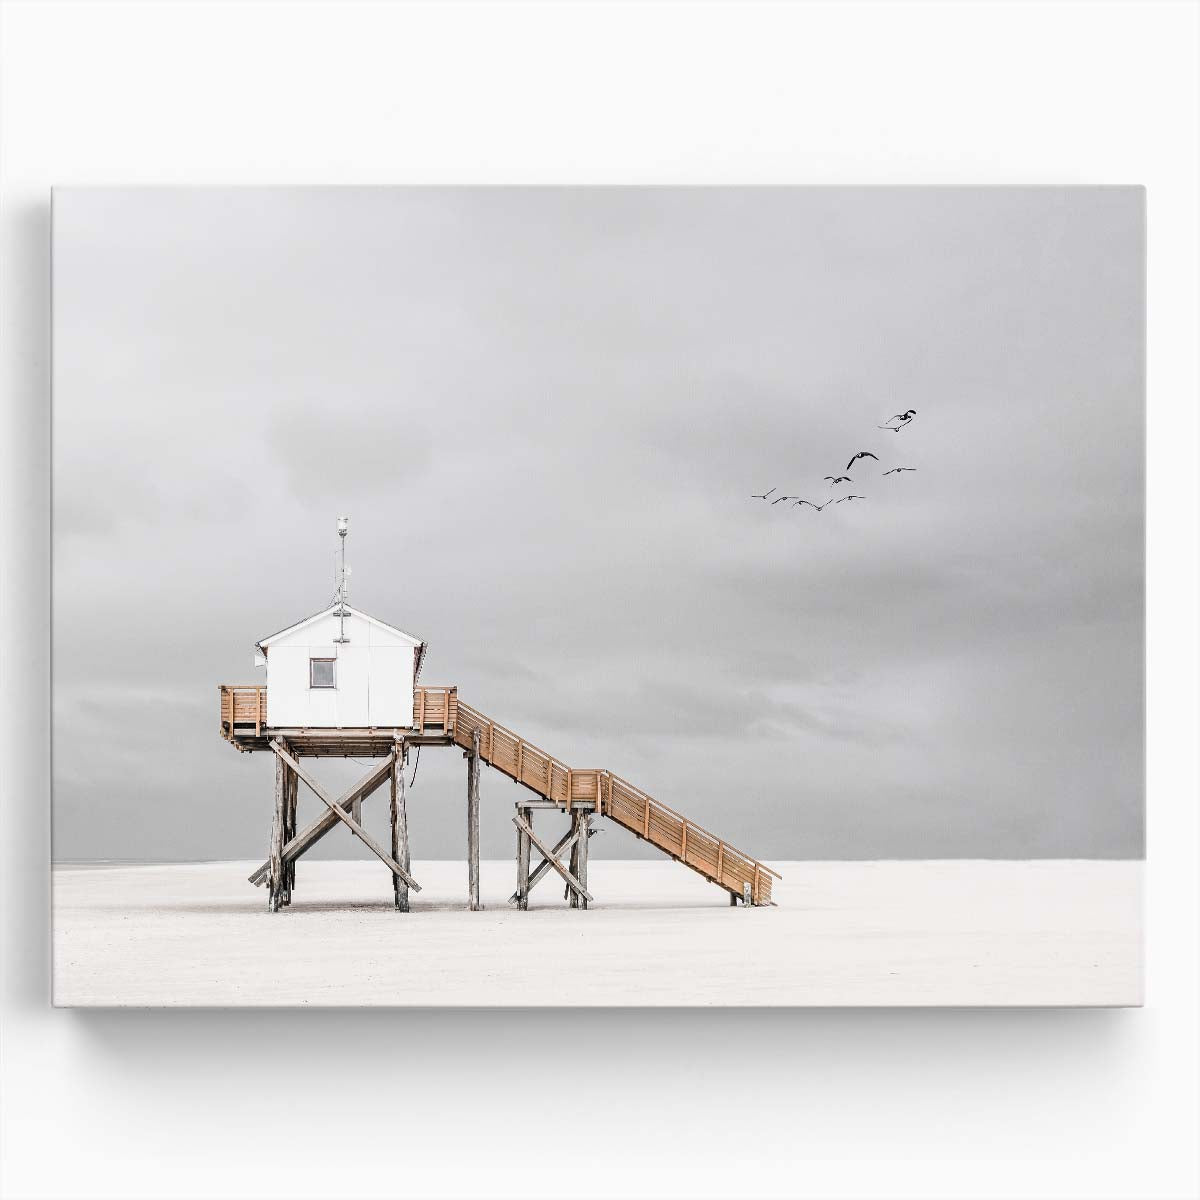 White Sand Beach & Lifeguard Tower Photo Wall Art by Luxuriance Designs. Made in USA.